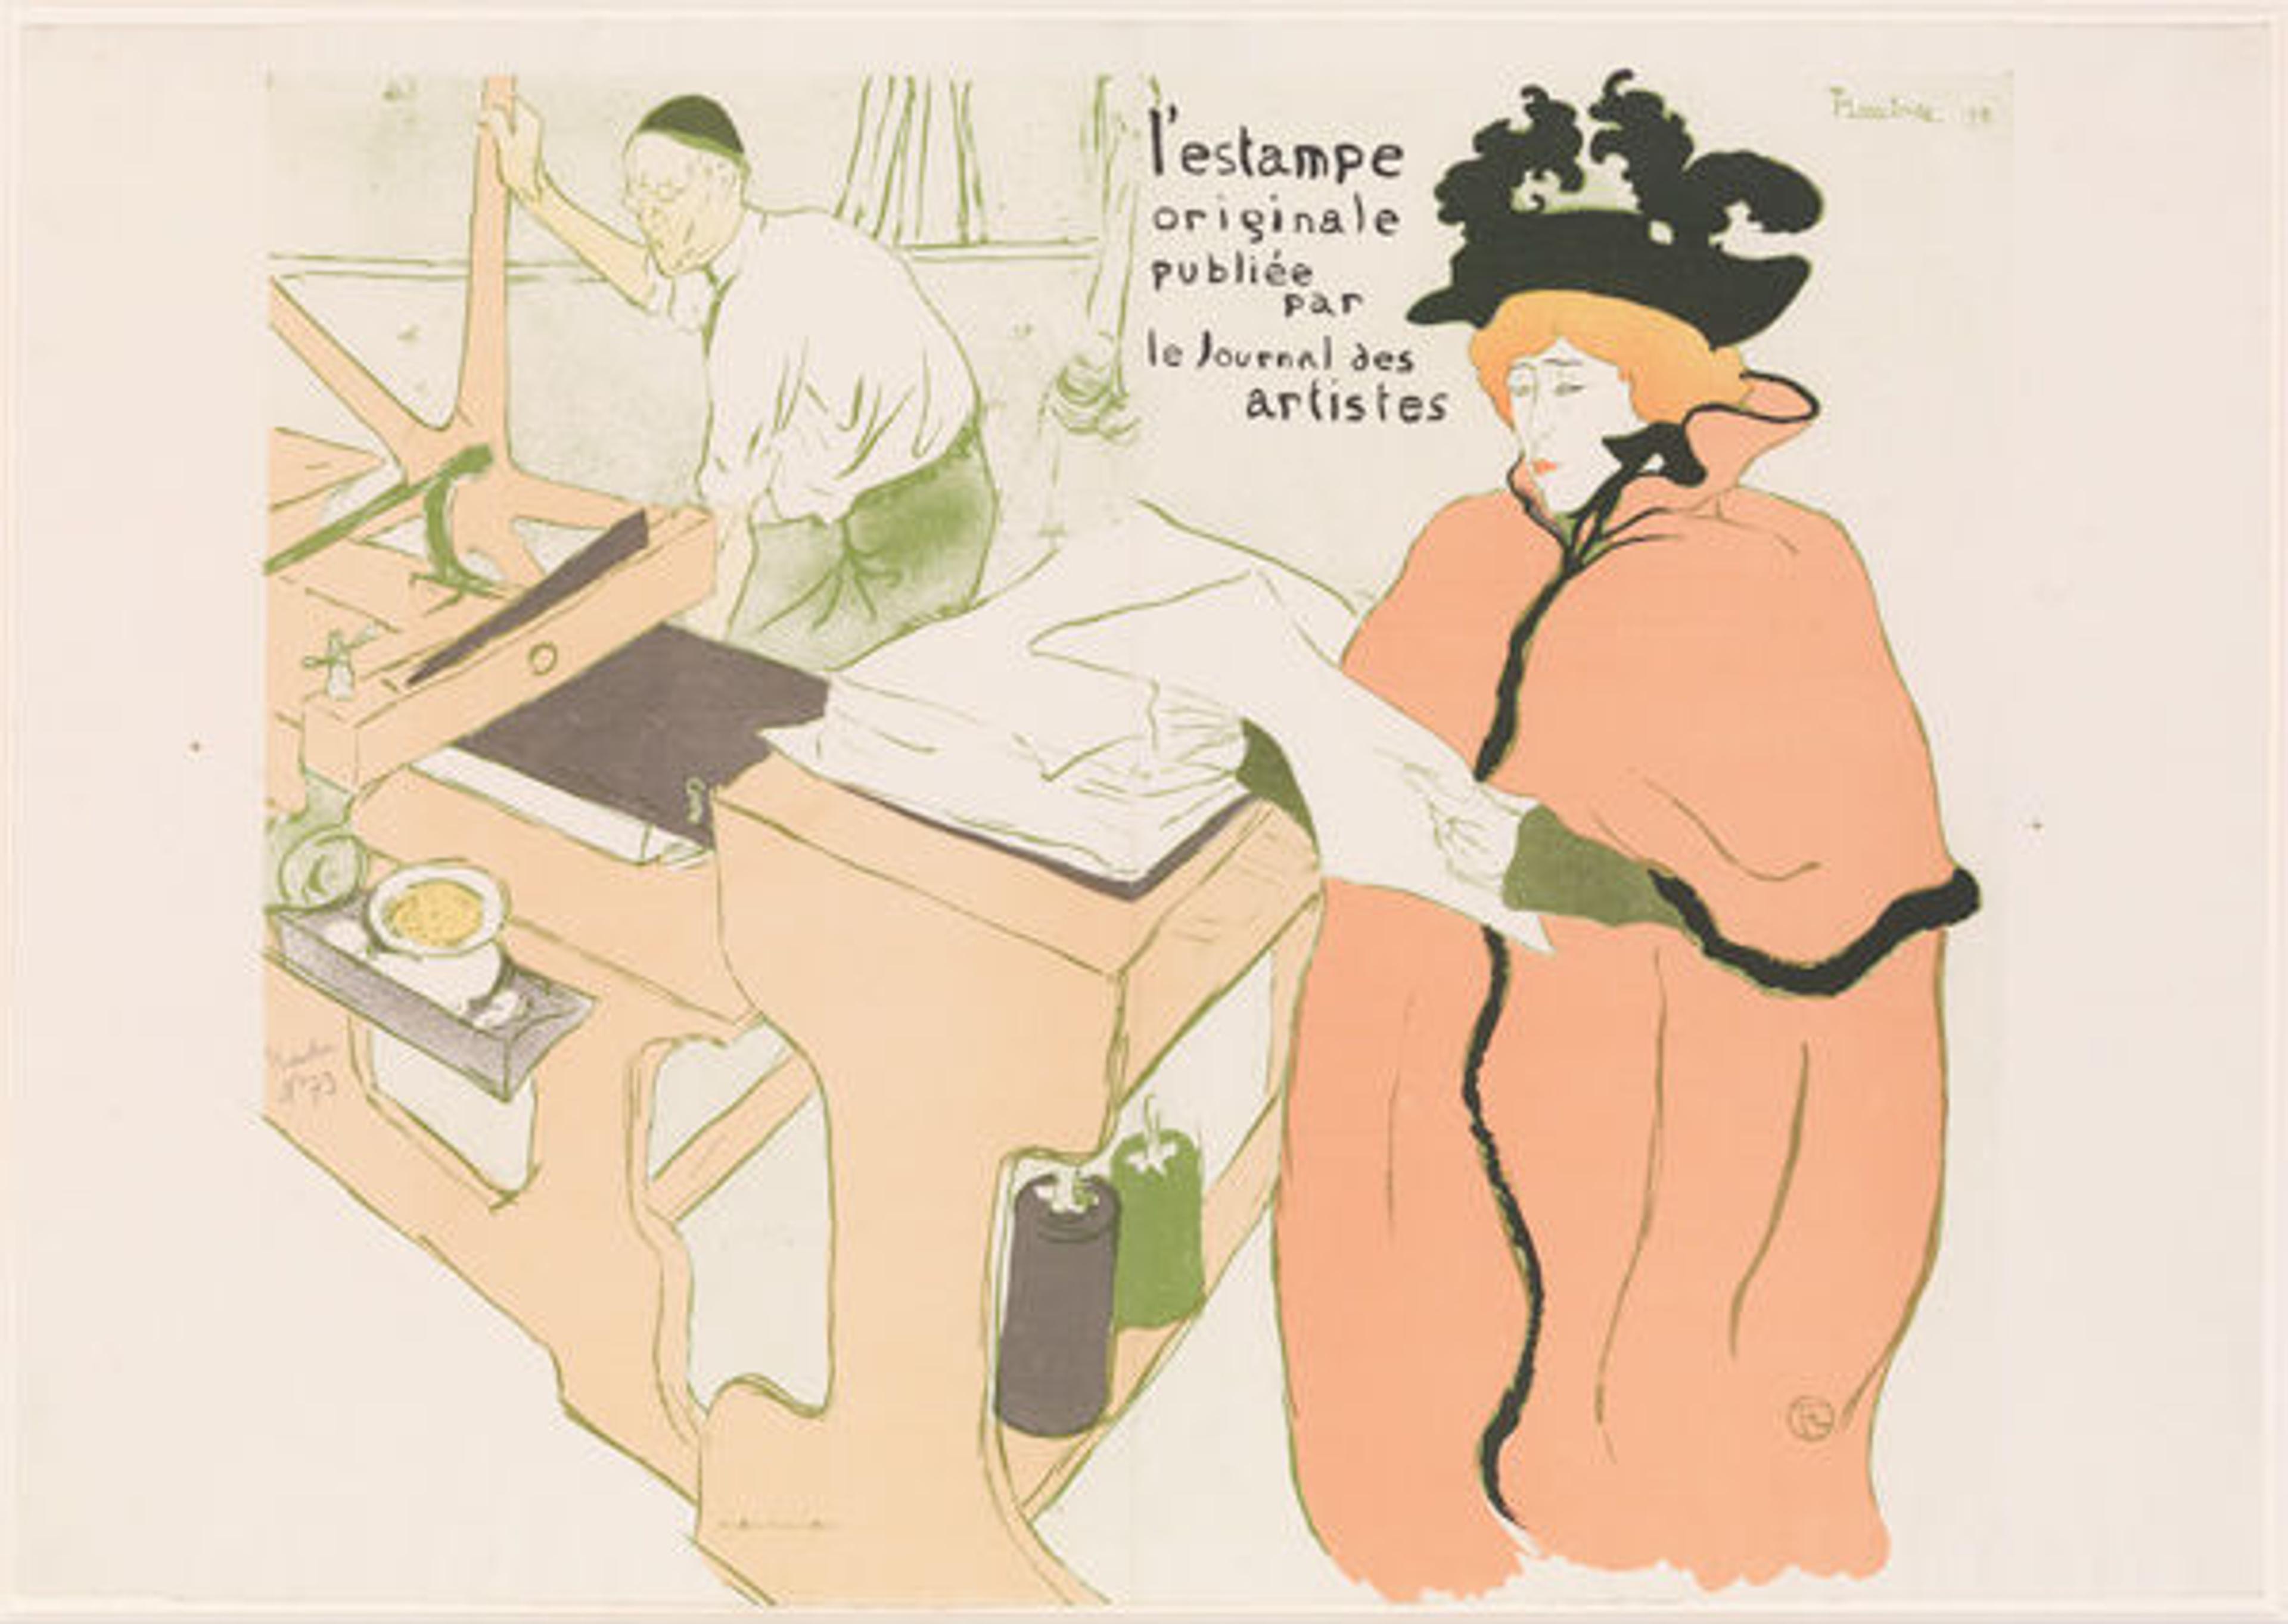 Cover for L'Estampe Originale, published by the Journal des Artistes (Album I), 1893. Henri de Toulouse-Lautrec (French, 1864–1901). Printer Edward Ancourt (French, 19th century). Publisher André Marty (French, born 1857). Lithograph printed in six colors on folded wove paper; only state; Sheet: 23 in. x 32 5/8 in. (58.4 x 82.8 cm). Image: 22 1/4 x 25 11/16 in. (56.5 × 65.2 cm). The Metropolitan Museum of Art, New York, Rogers Fund, 1922 (22.82.1-1)